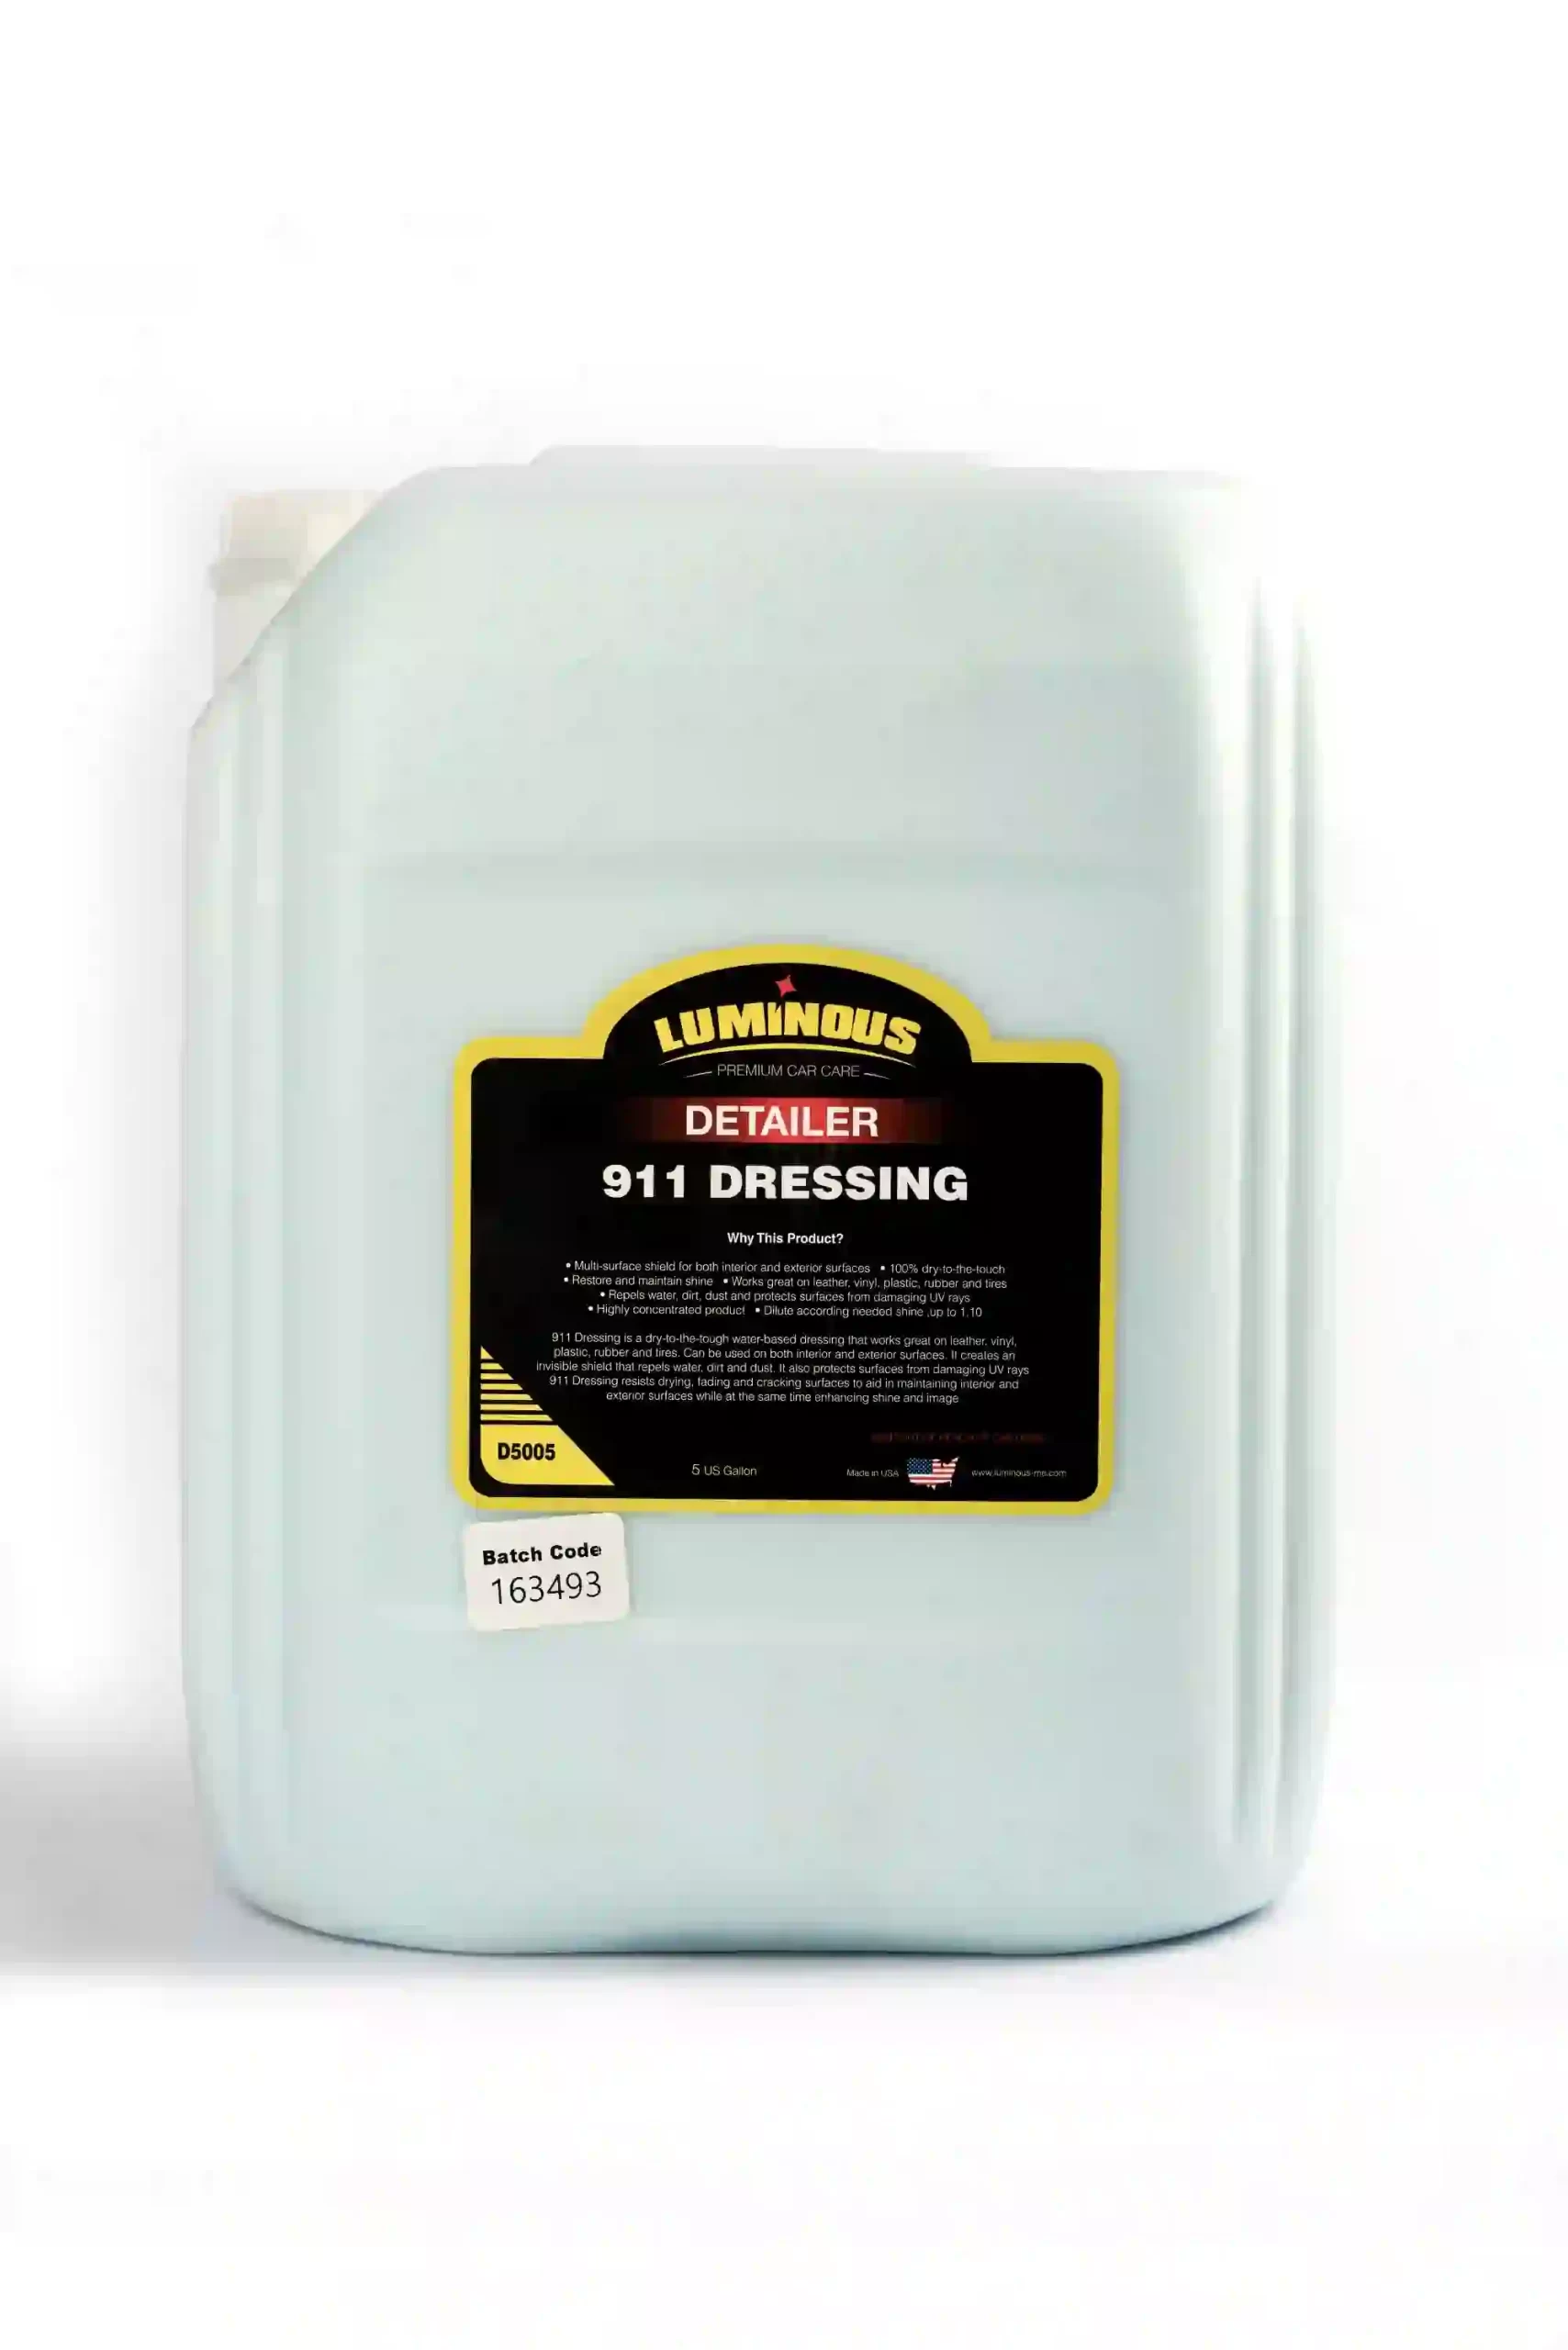 Luminous 911 dressing for interior and exterior surfaces. Repels water, dirt, and dust, enhances shine.